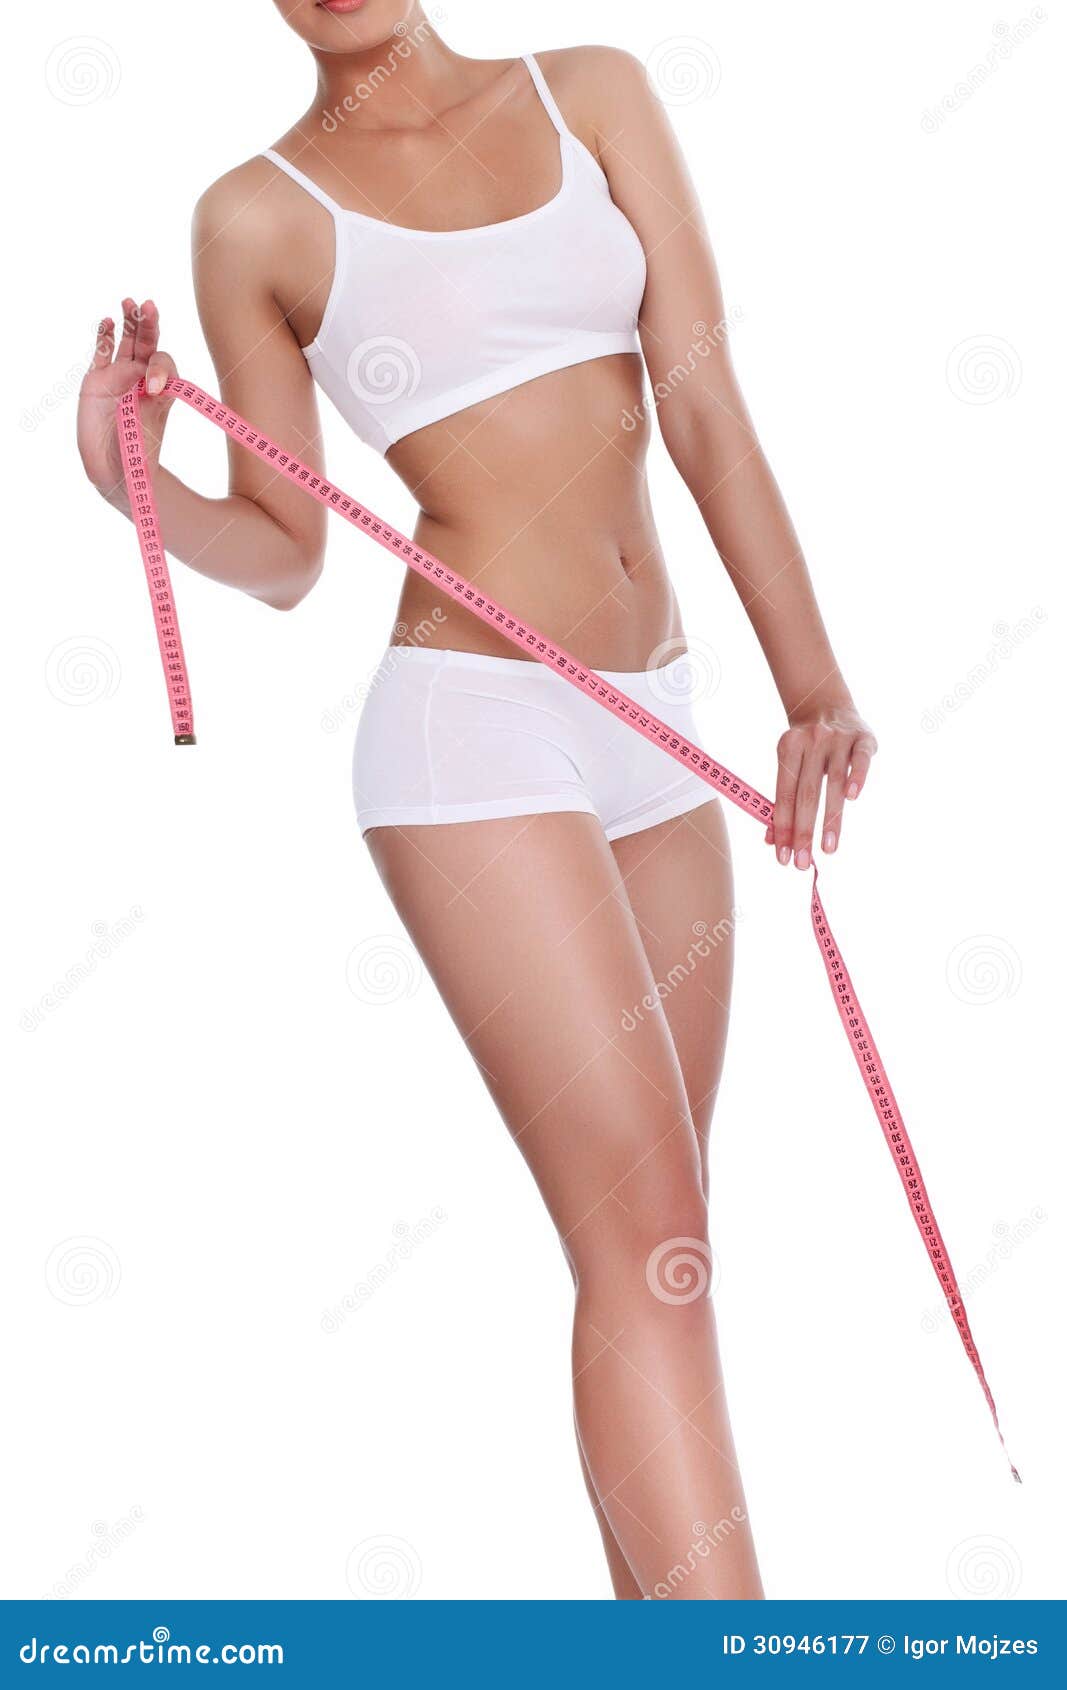 Measuring Waist with Measuring Tape Stock Image - Image of body, pure:  30946177